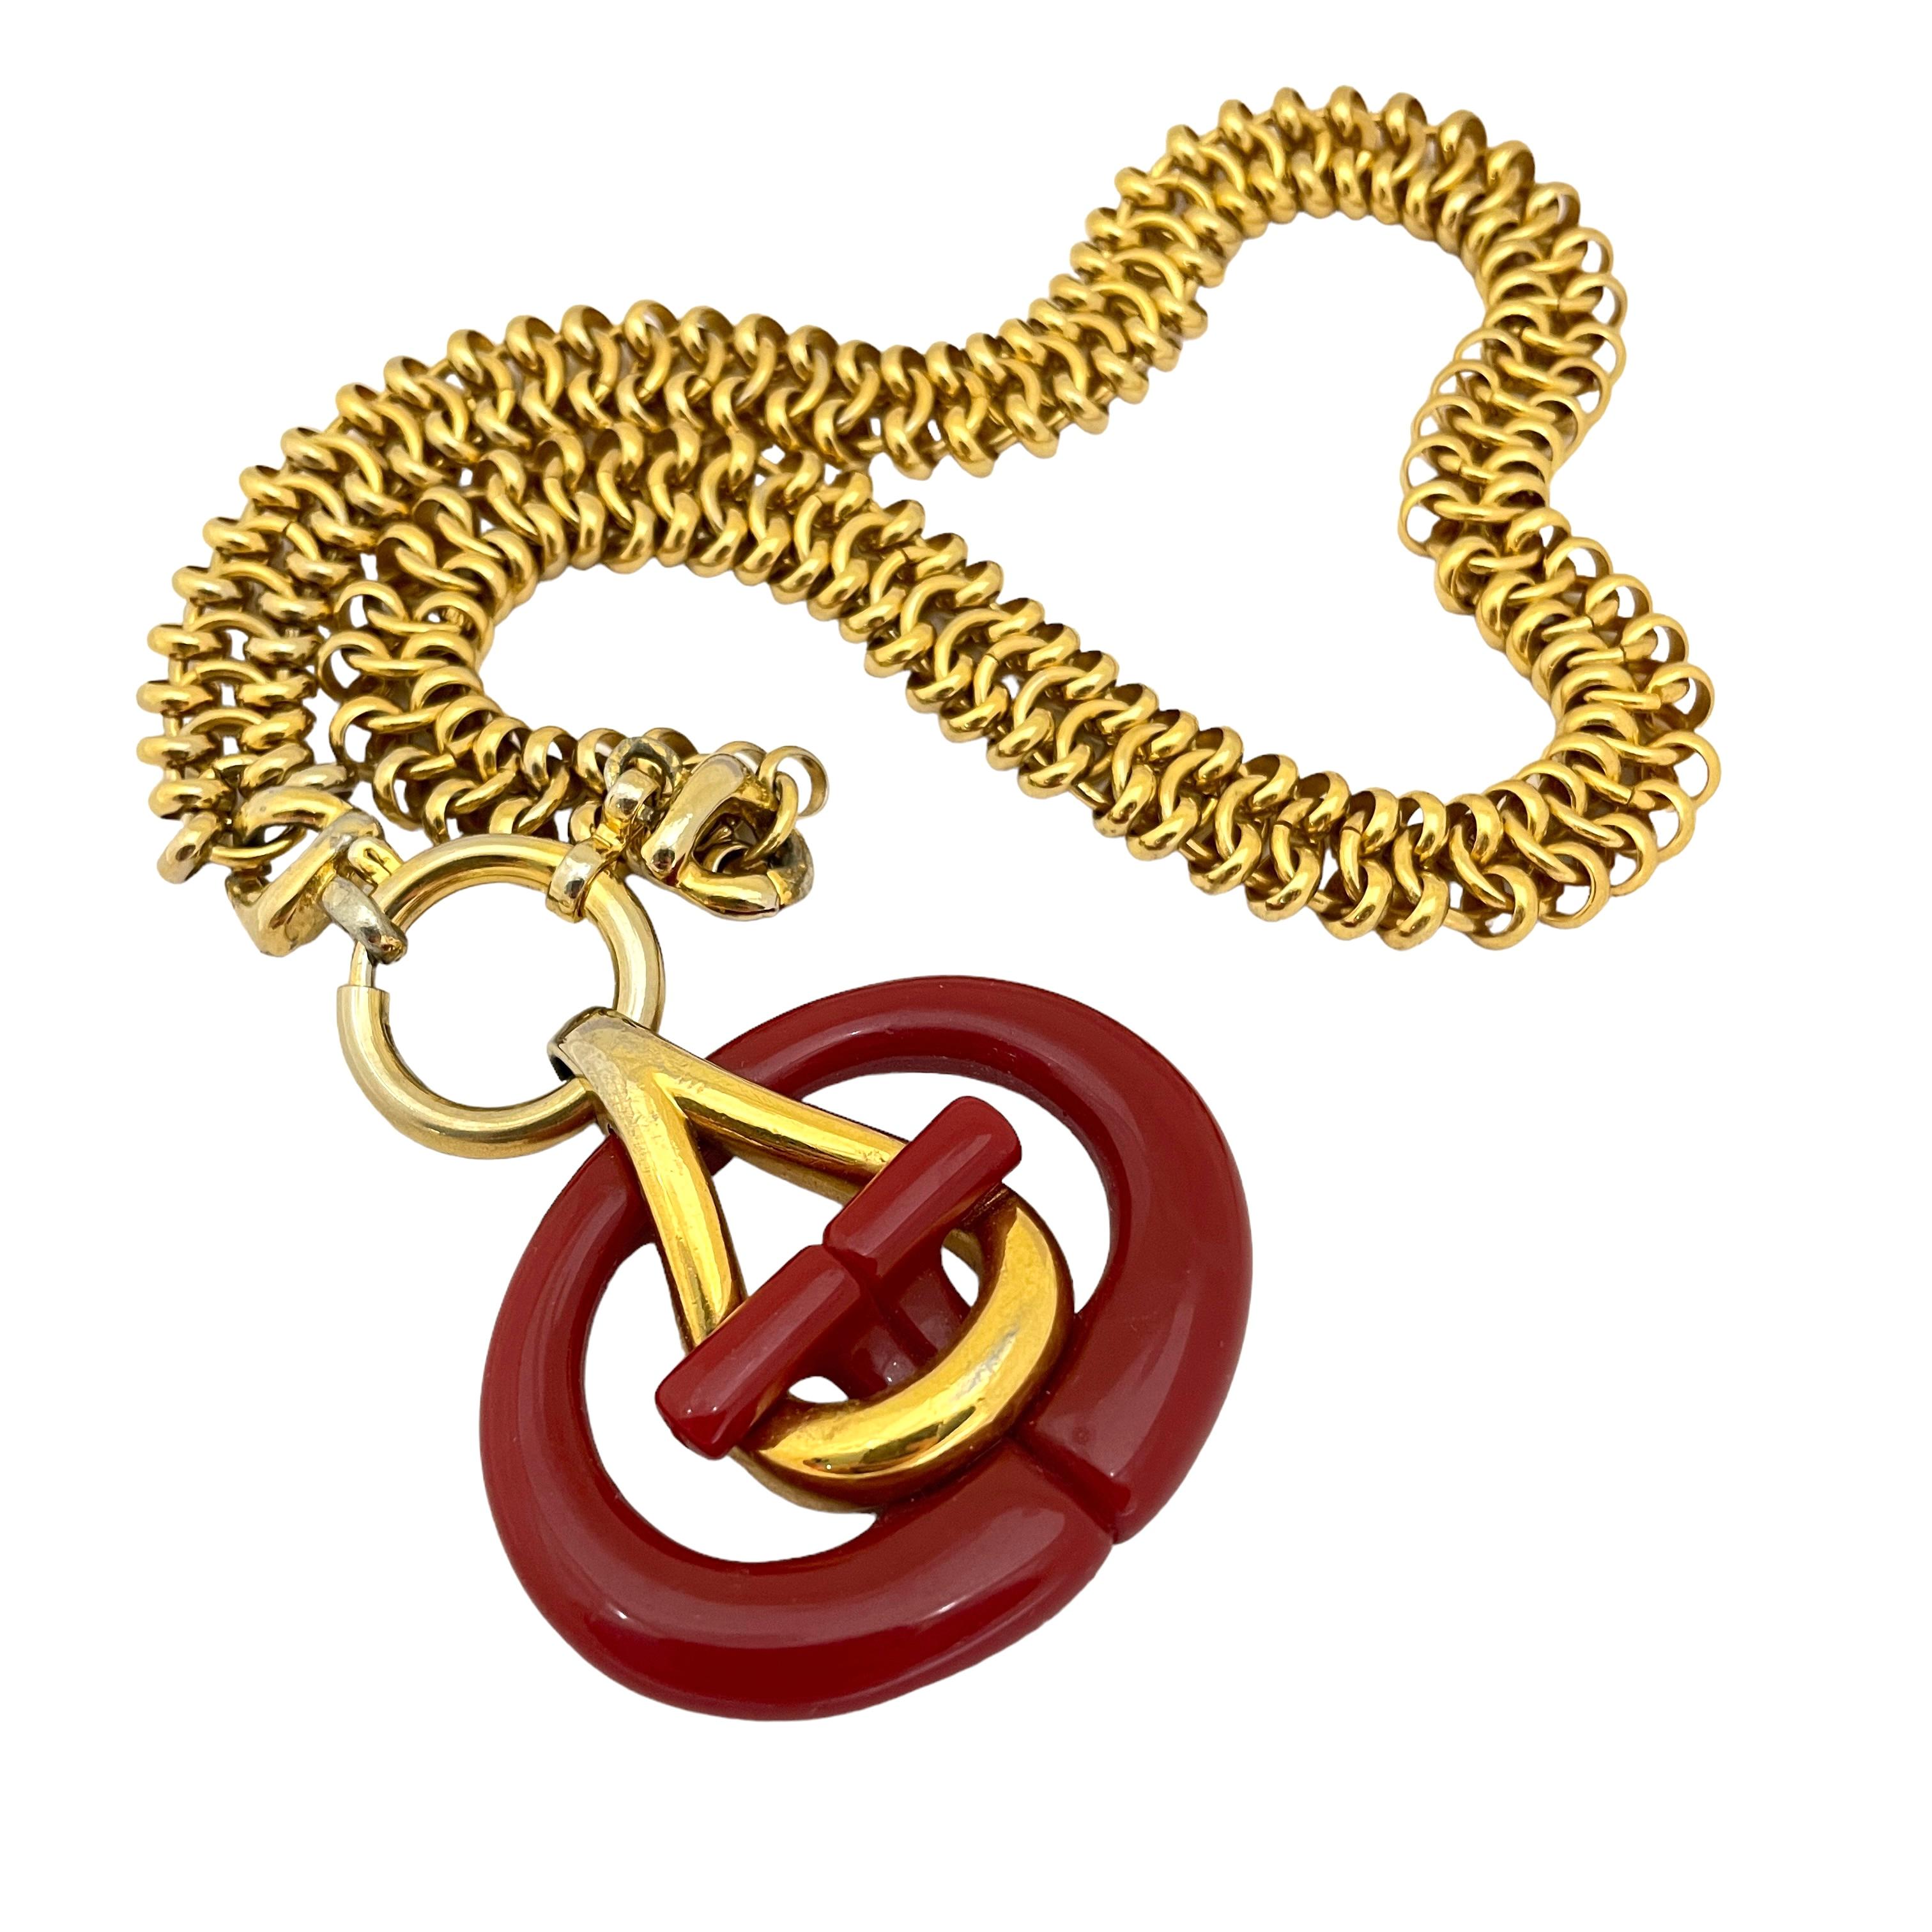 Vintage GIVENCHY gold red lucite logo designer runway necklace In Good Condition For Sale In Palos Hills, IL